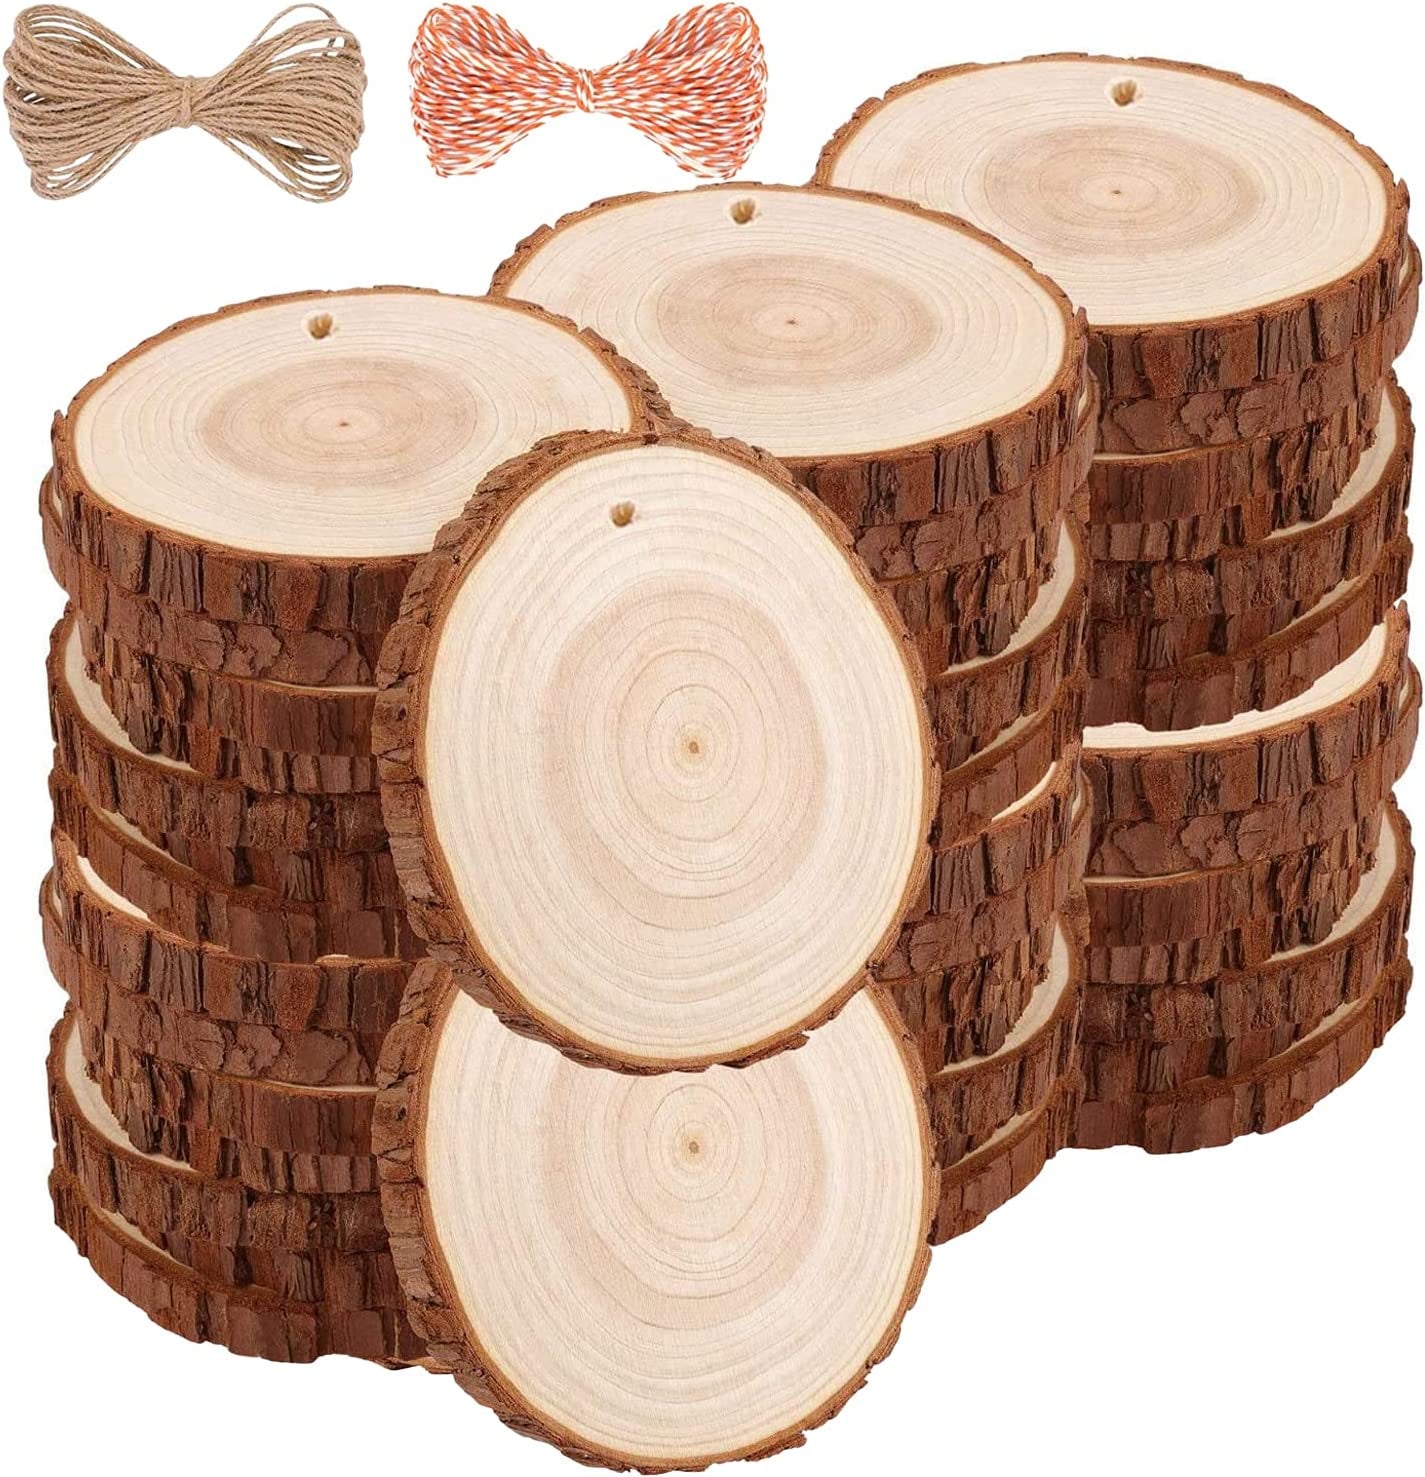 Natural Wood Slices Craft Wood Kit with Hole Wooden Circles Tree Slices for  Arts and Crafts Christmas Ornaments DIY Crafts